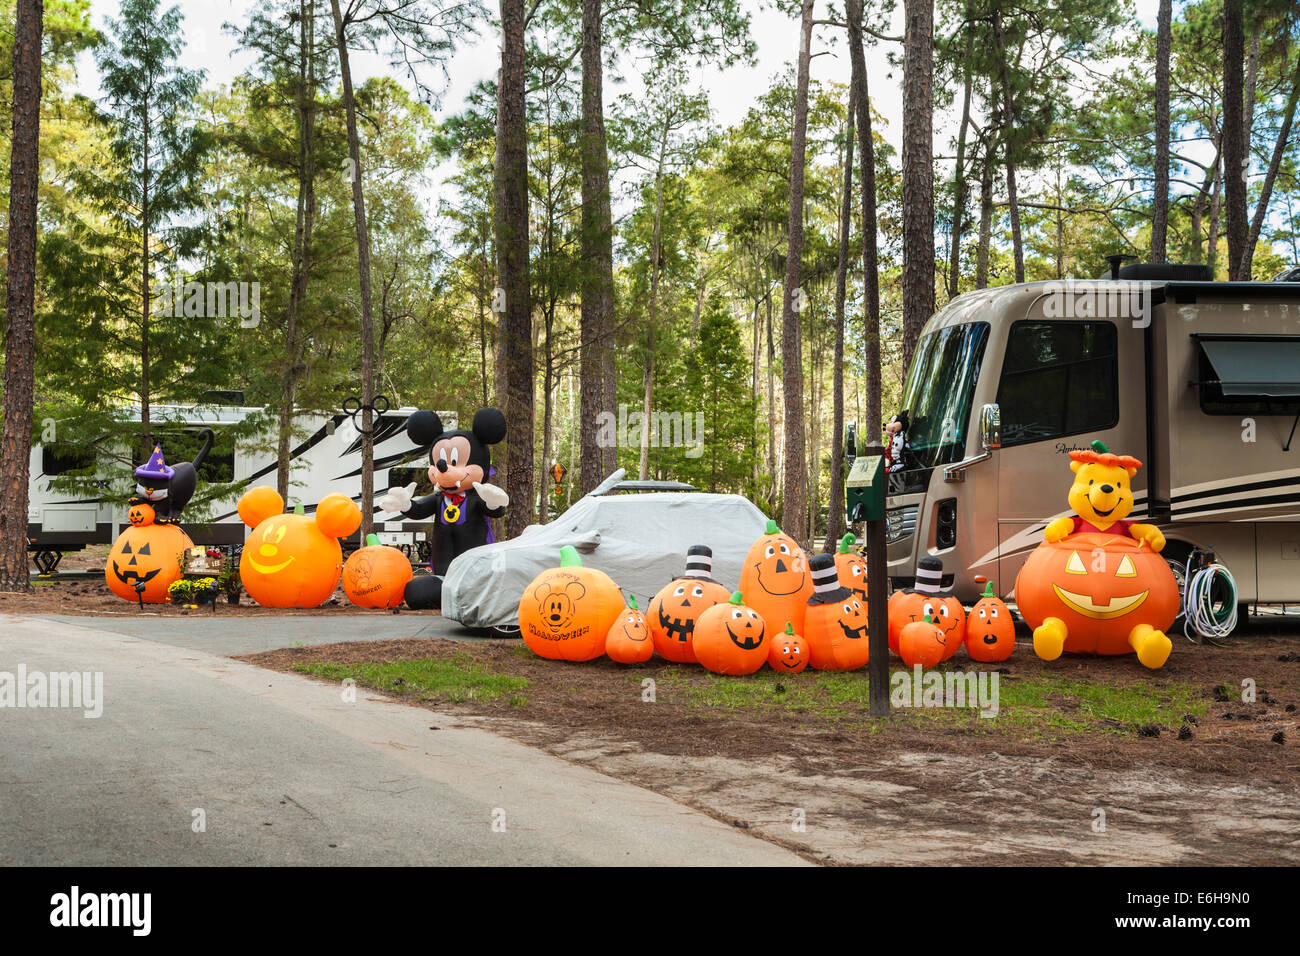 Pumpkins And Mickey Mouse Halloween Decorations In Fort Wilderness